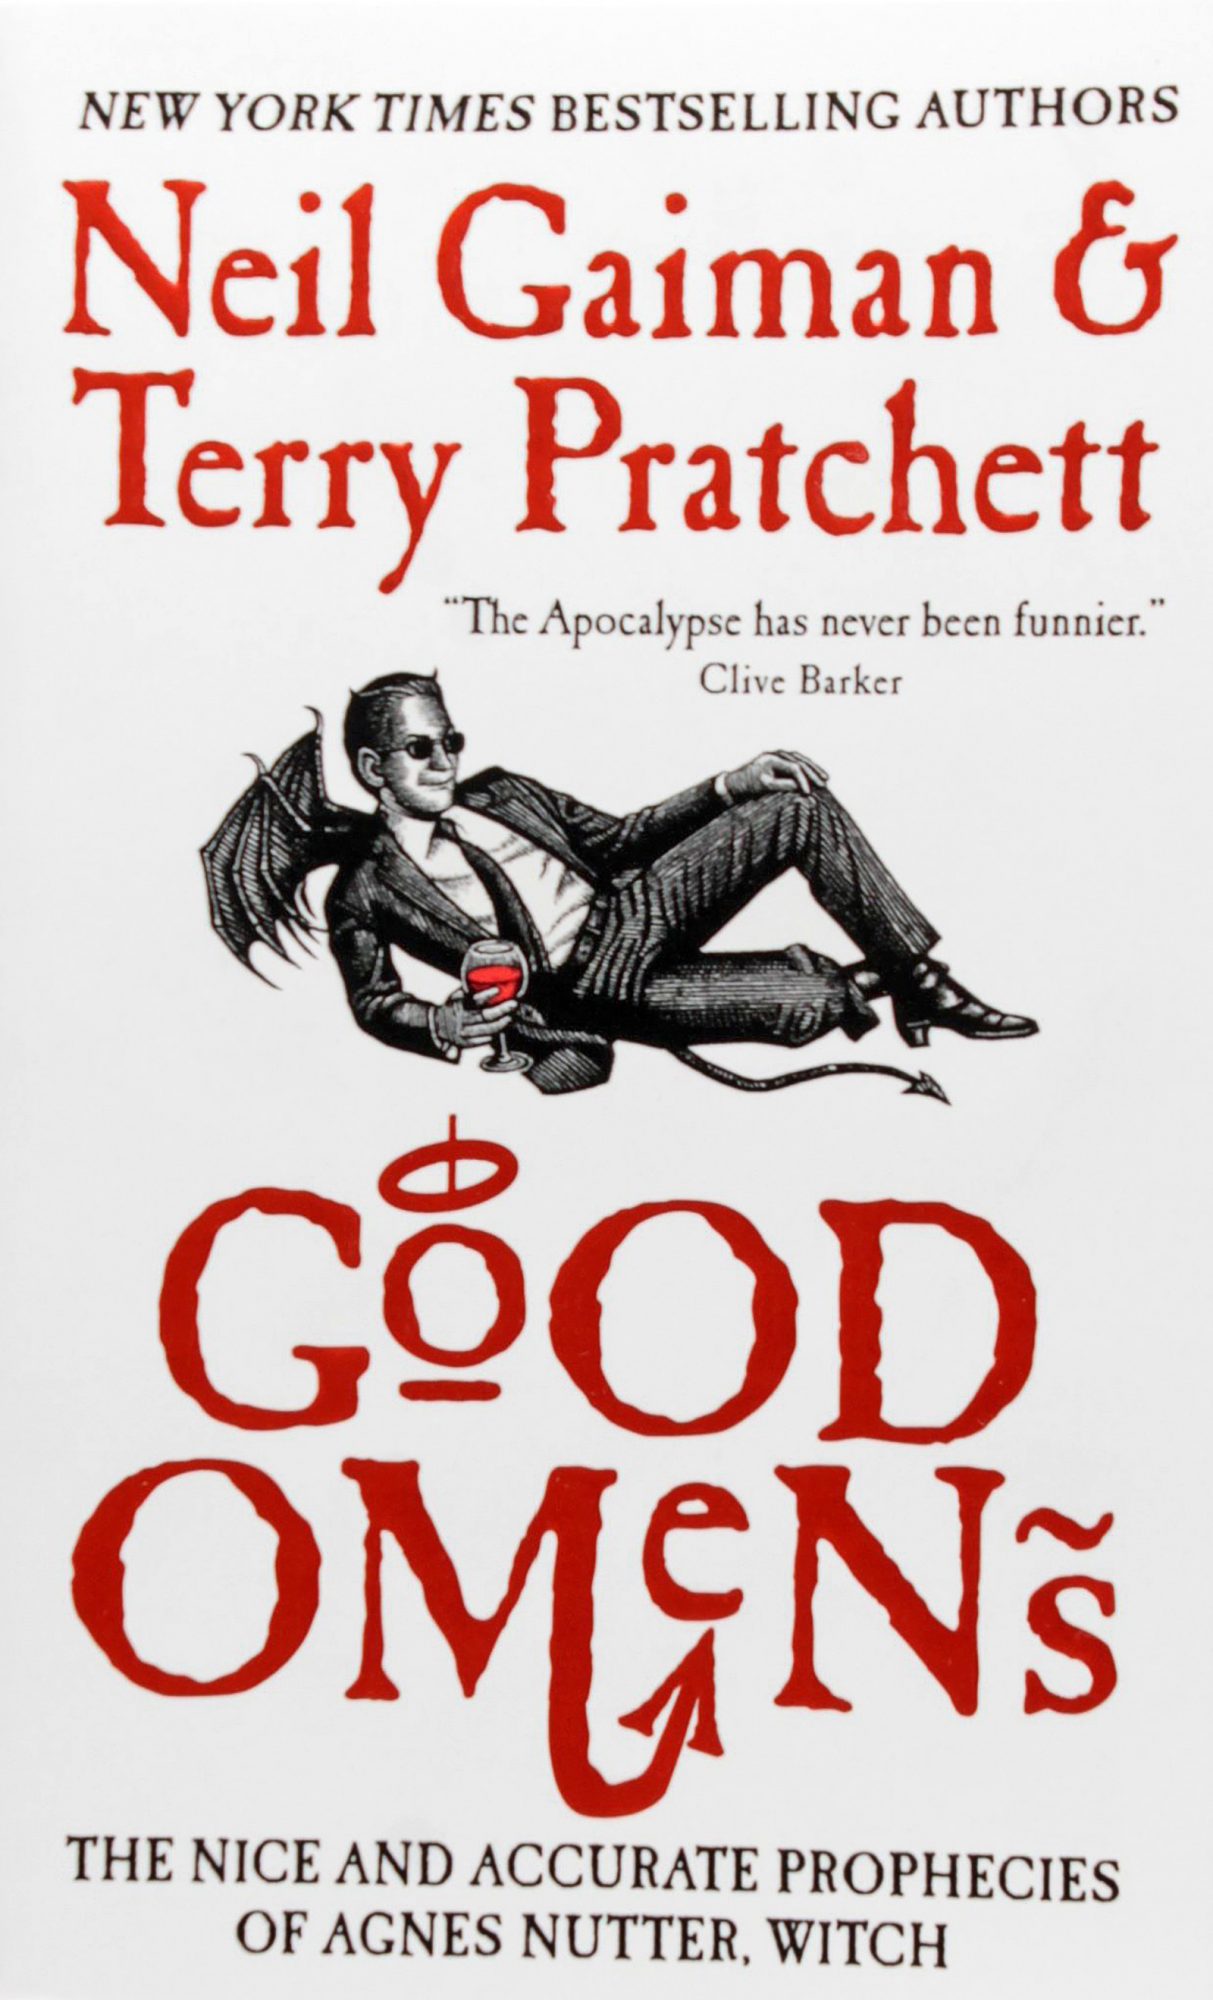 Good Omens audiobook: The Nice and Accurate Prophecies of Agnes Nutter, Witch